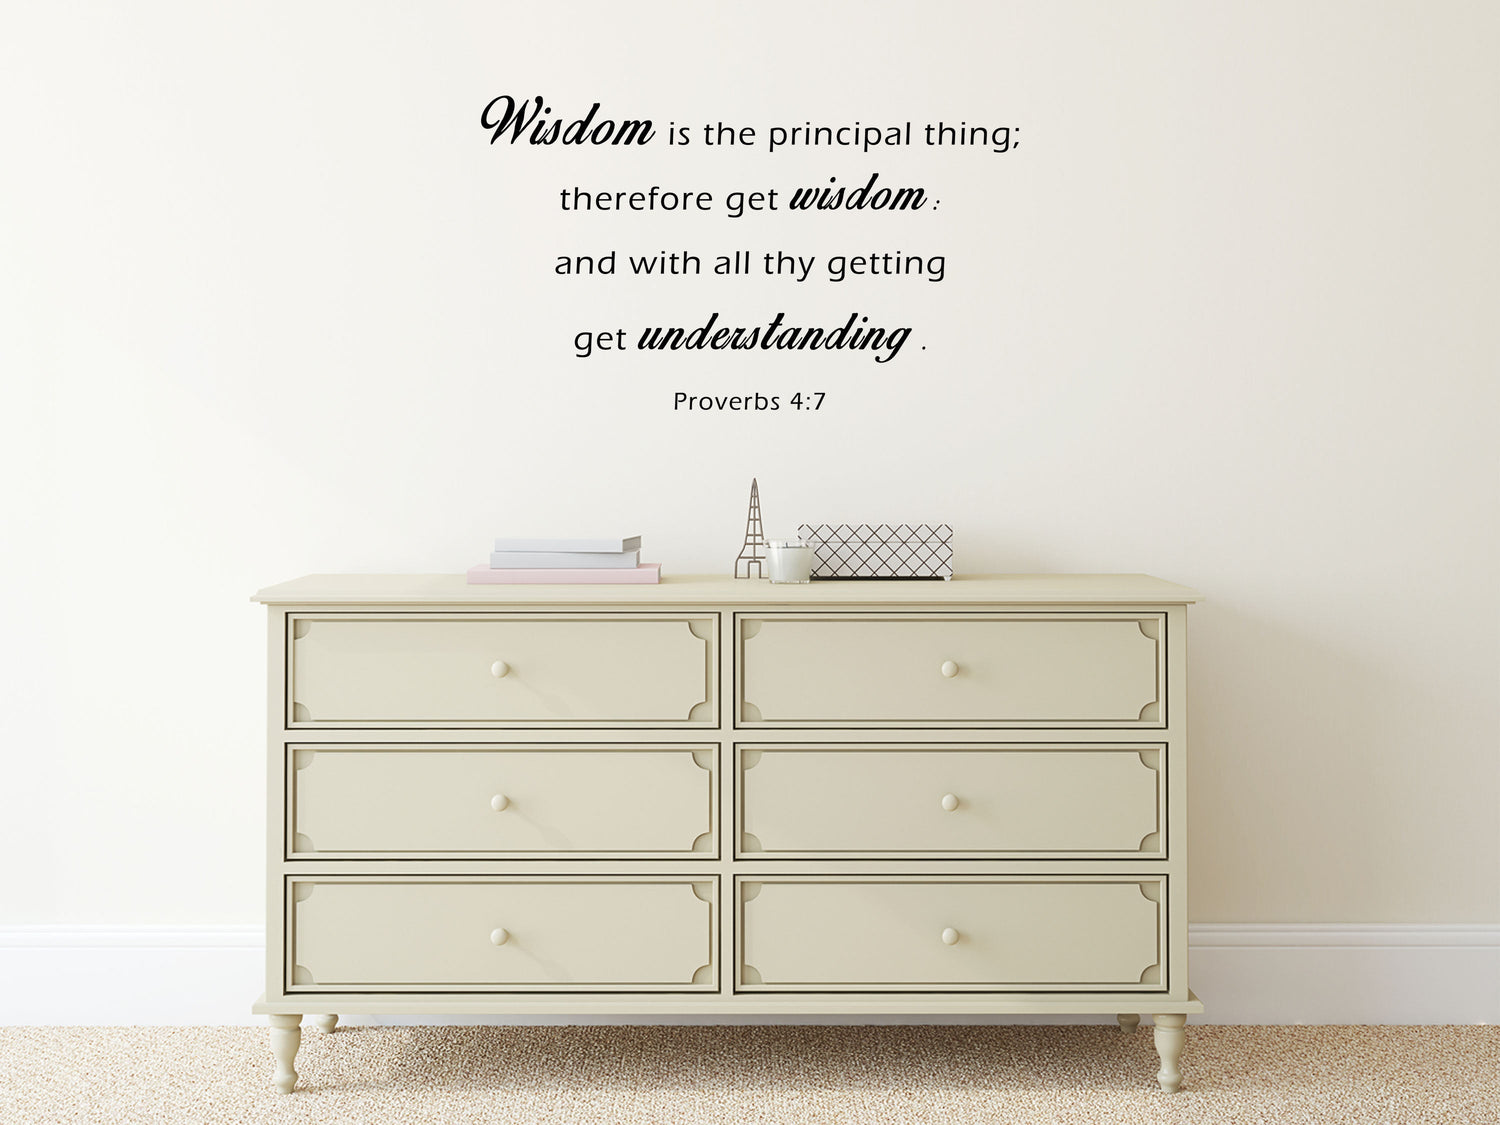 Proverbs 4:7 Wisdom is the principal thing - Inspirational Christian Bible Verse Scripture Wall Decal Church Quote Bible Sticker Vinyl Wall Decal Inspirational Wall Signs 